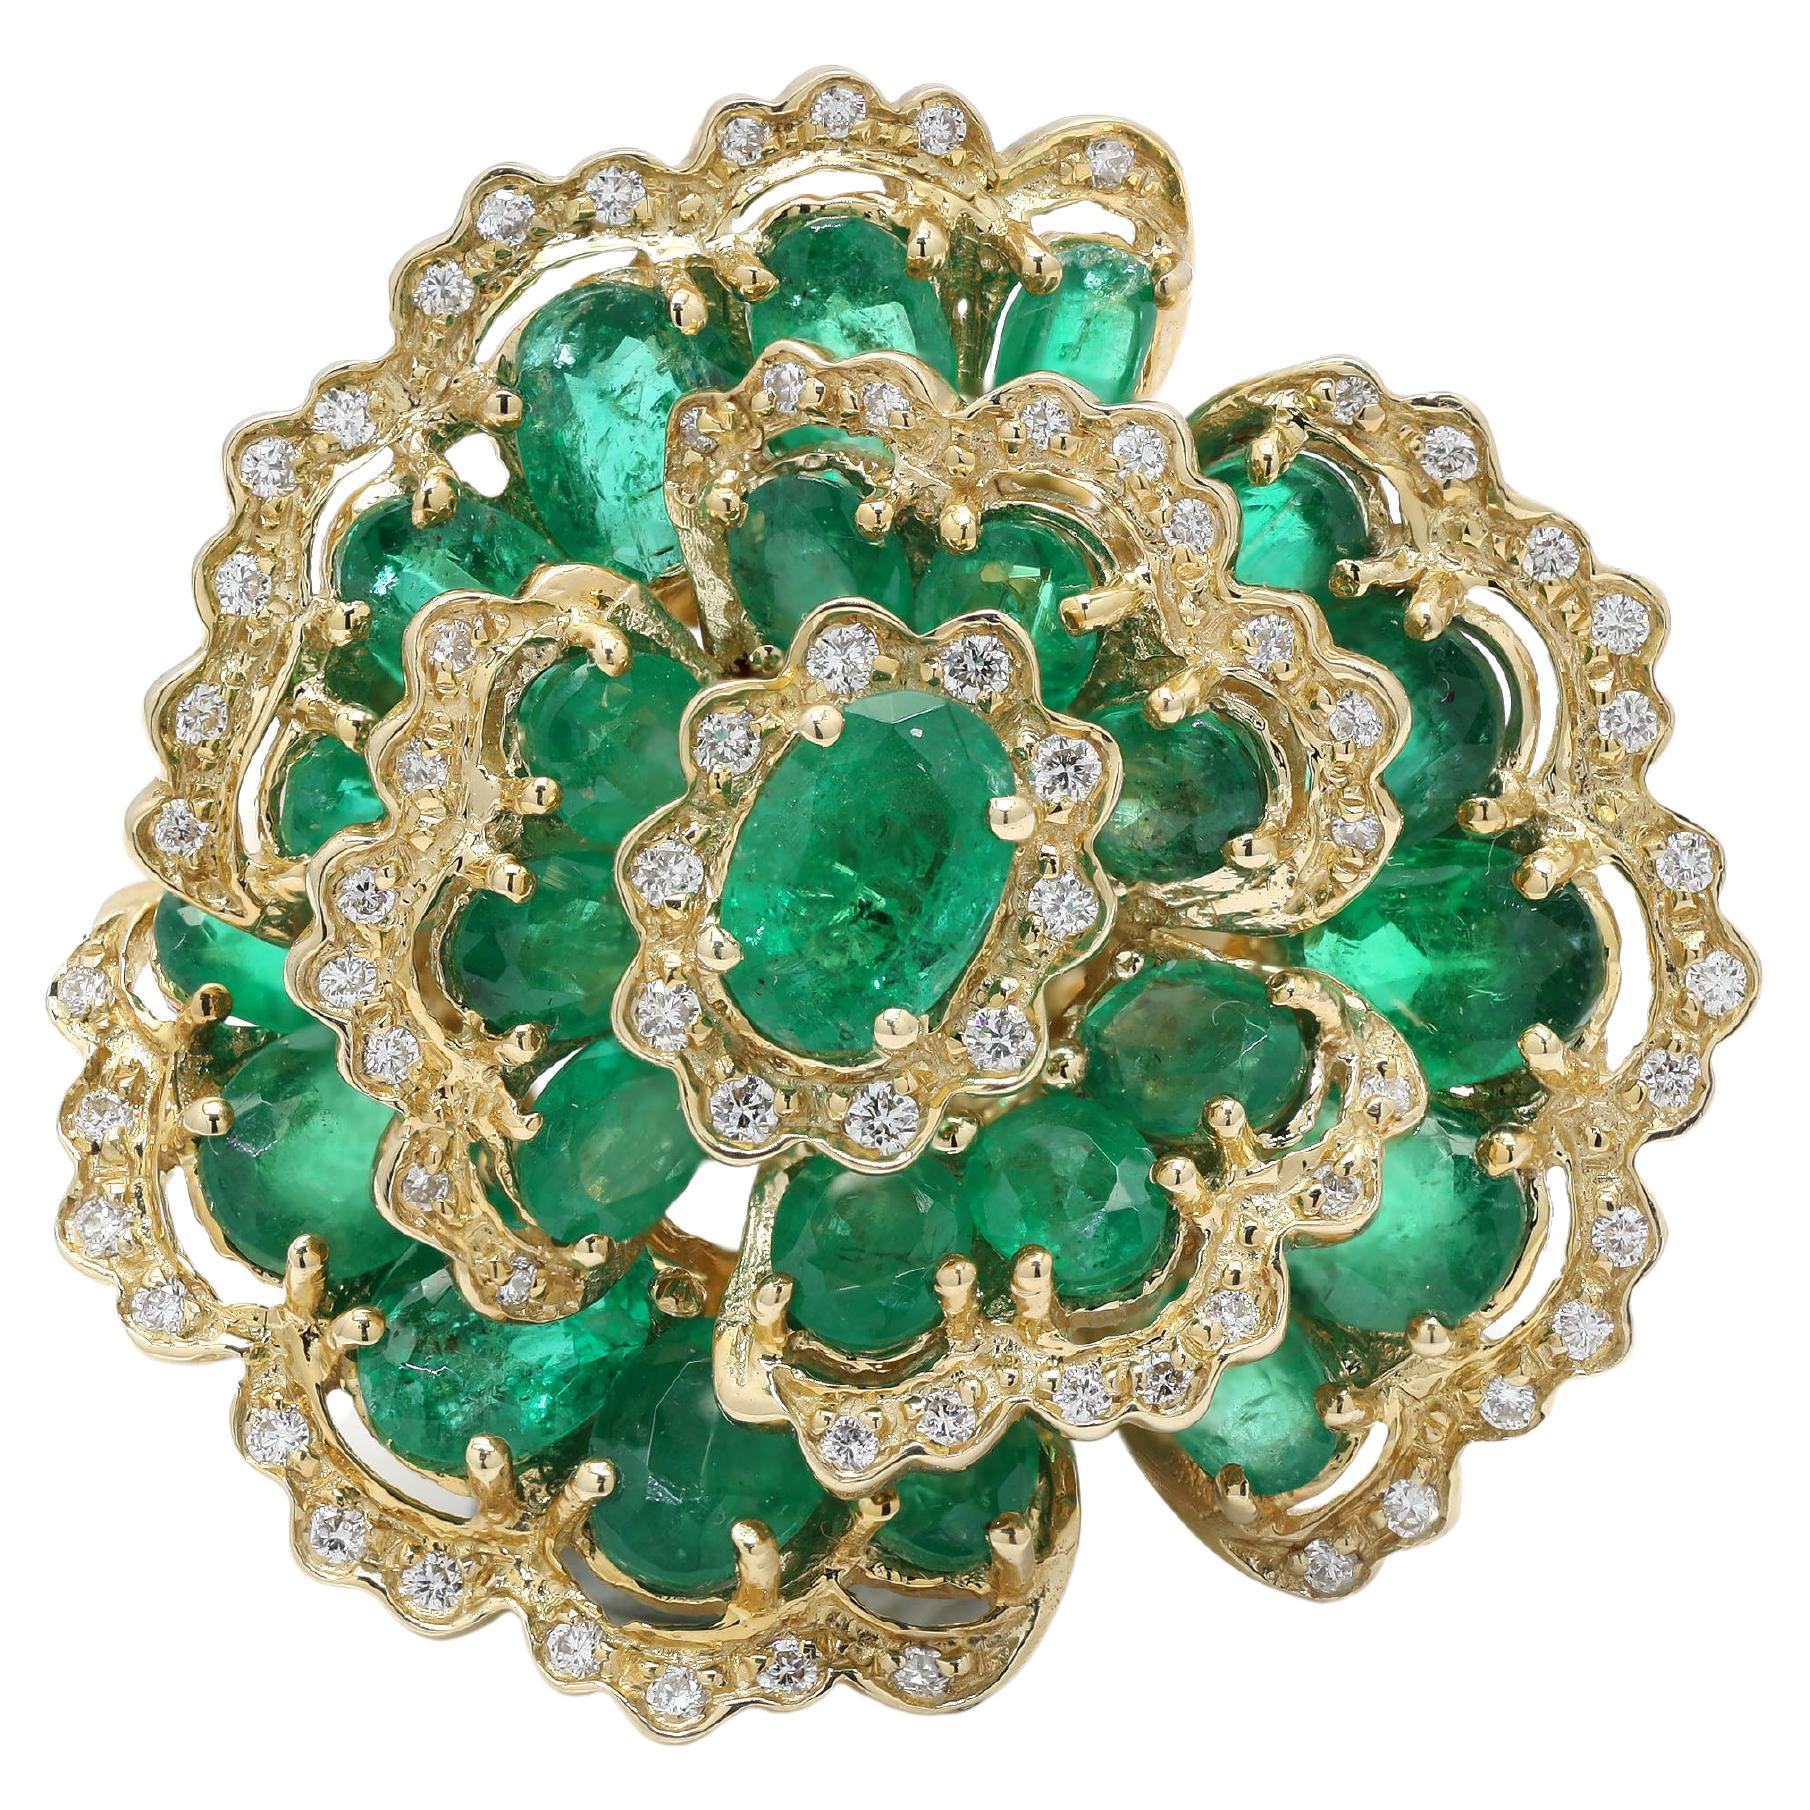 For Sale:  5.82 ct Emerald Flower Ring with Diamonds in 14 Karat Yellow Gold